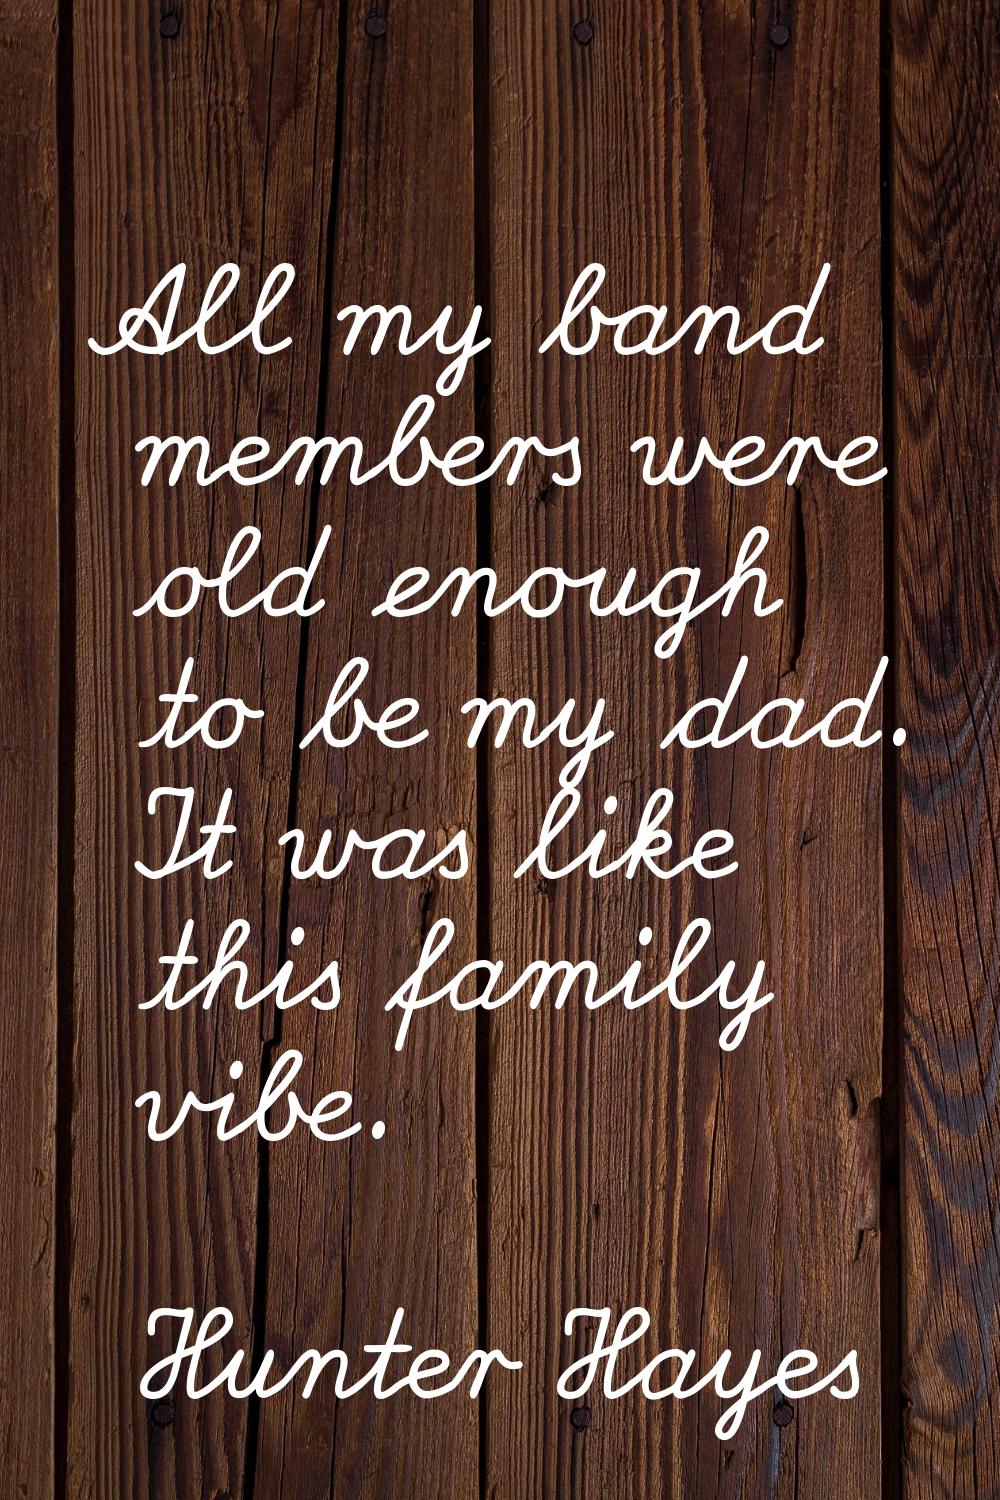 All my band members were old enough to be my dad. It was like this family vibe.